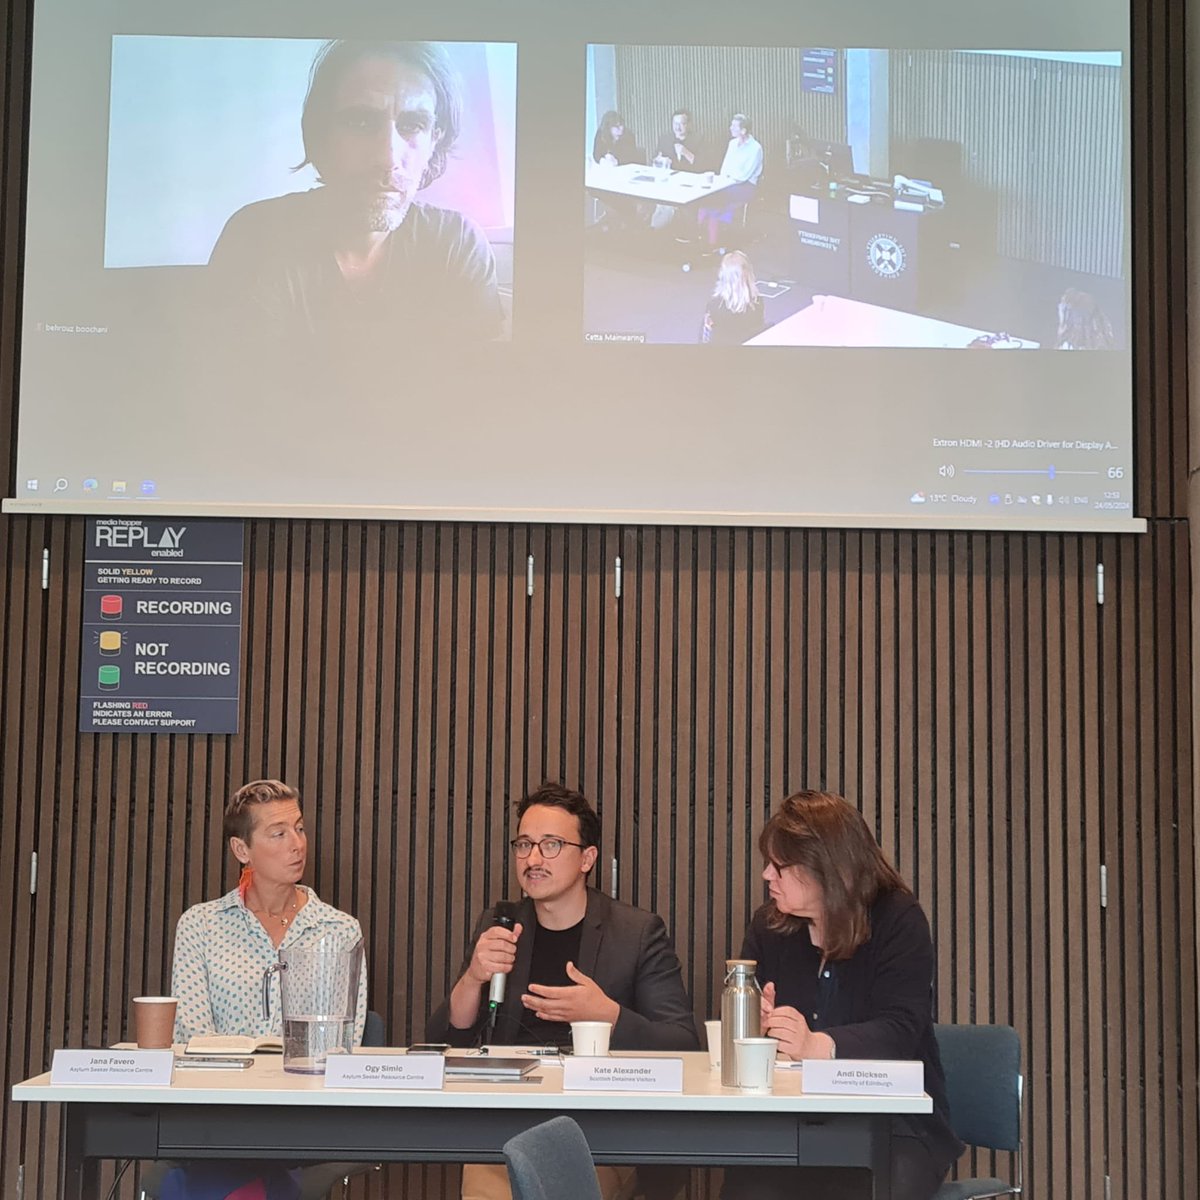 As always, an honour to present alongside @BehrouzBoochani @OgySimic discussing resistance to detention and detention as a failed policy @EdinburghPIR #detentionfails